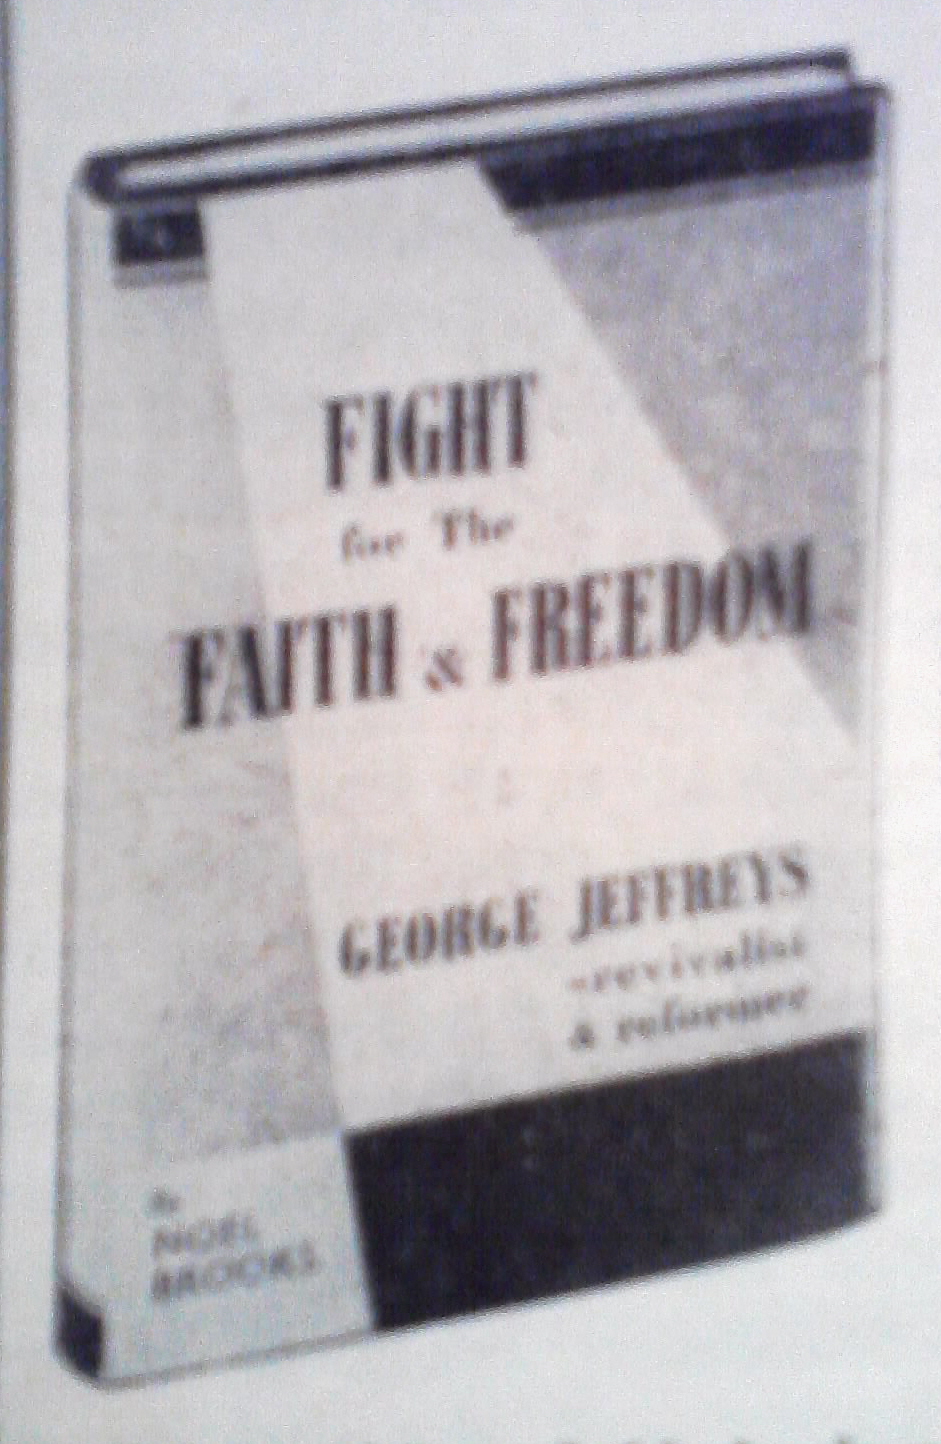 Fight for faith and freedom. DOWNLOADABLE VERSION ADOBE CAN BE VEIWED ON A KINDLE